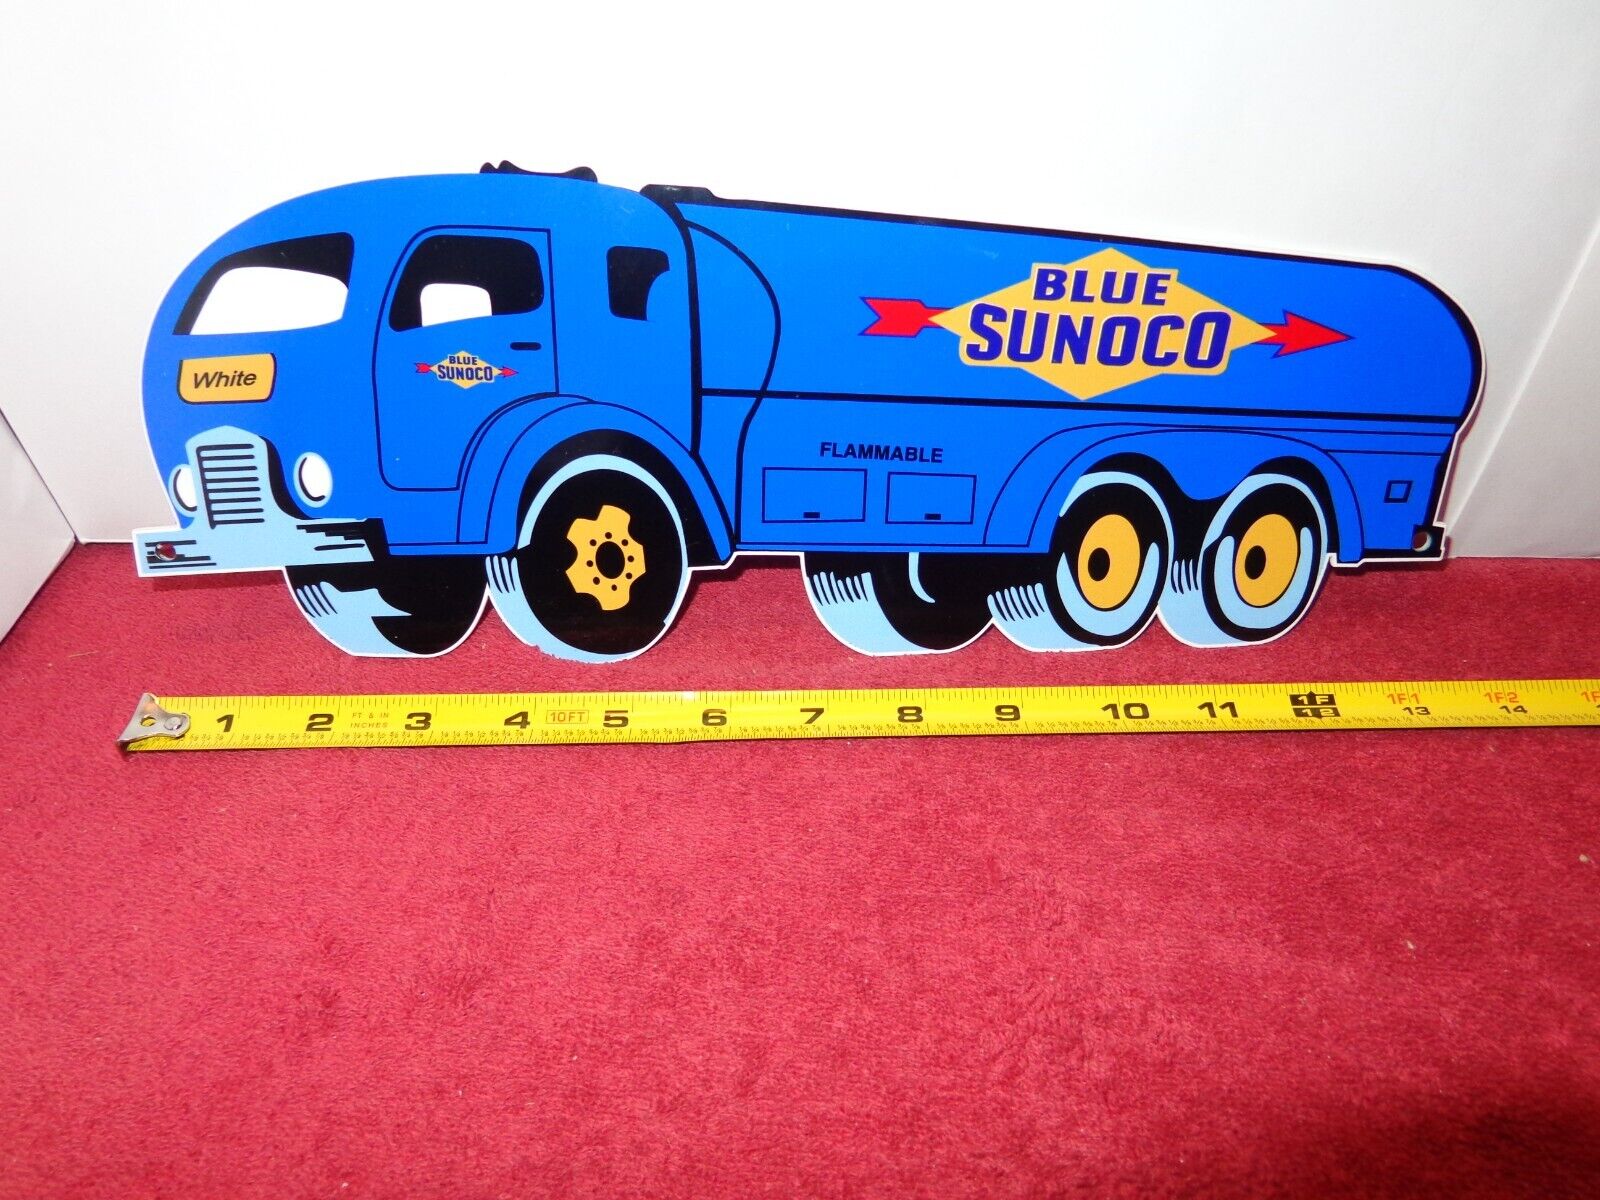 14 x 5 in BLUE SUNOCO GASOLINE DELIVERY TRUCK ADV. SIGN DIE CUT METAL # Z 250